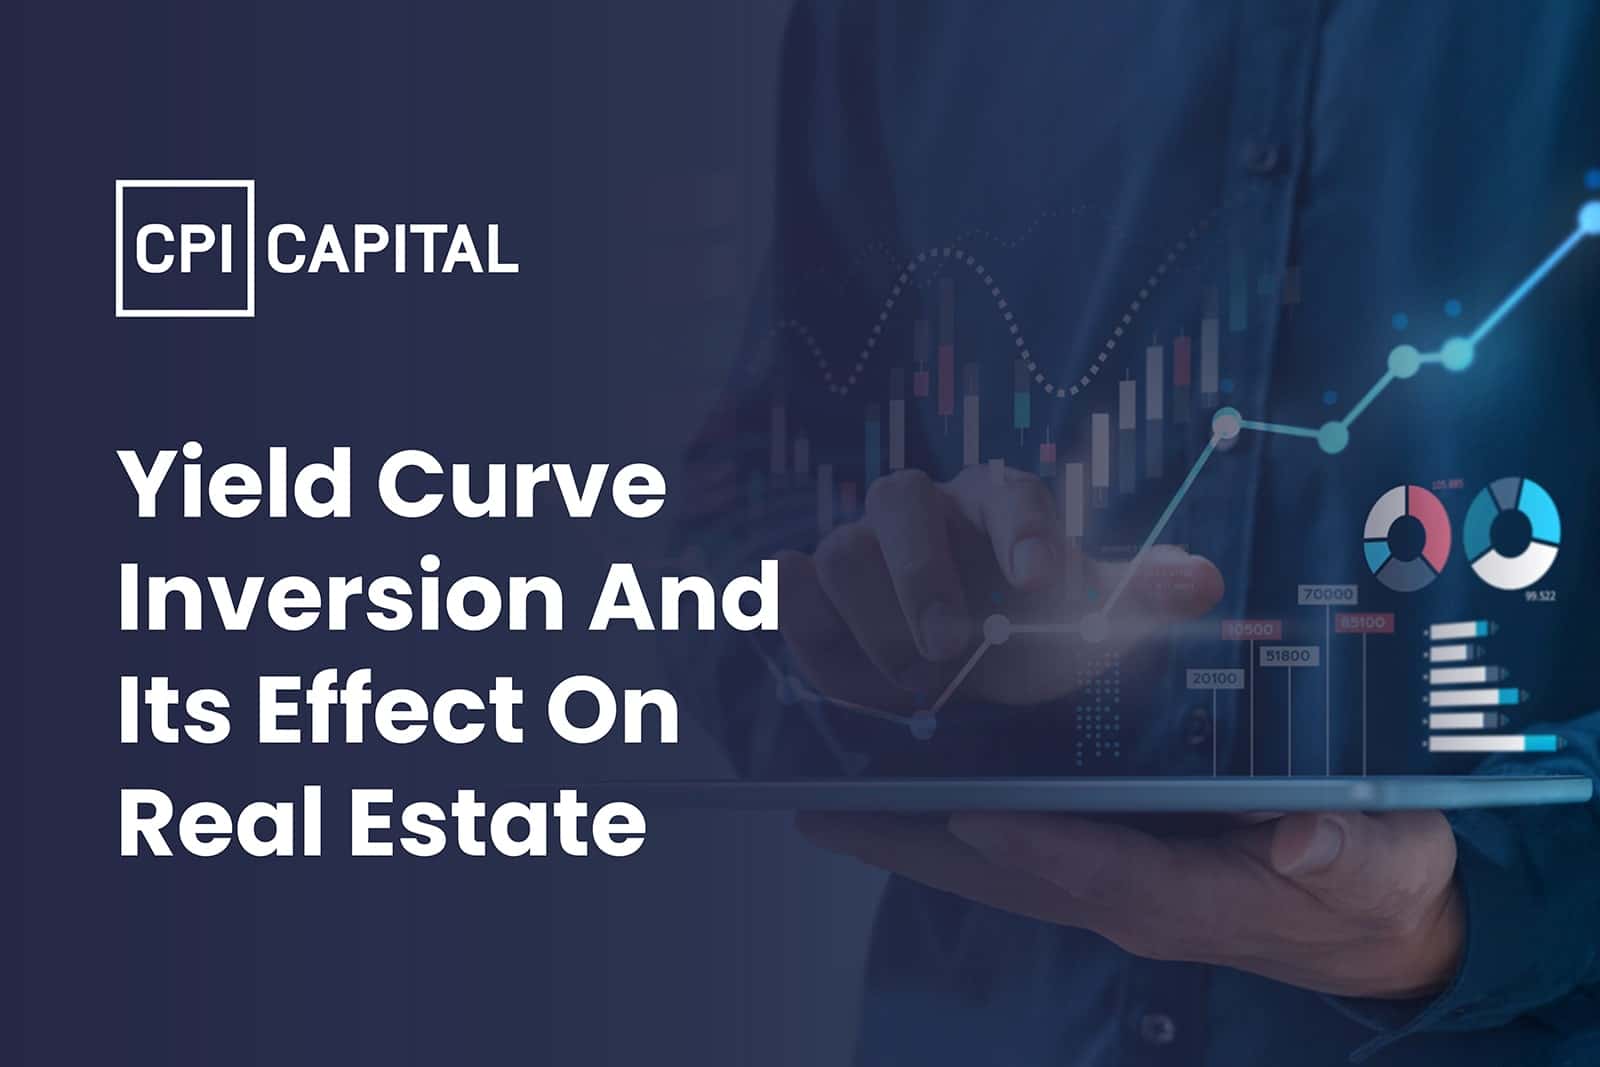 CPI capital Yield Curve Inversion And Its Effect On Real Estate